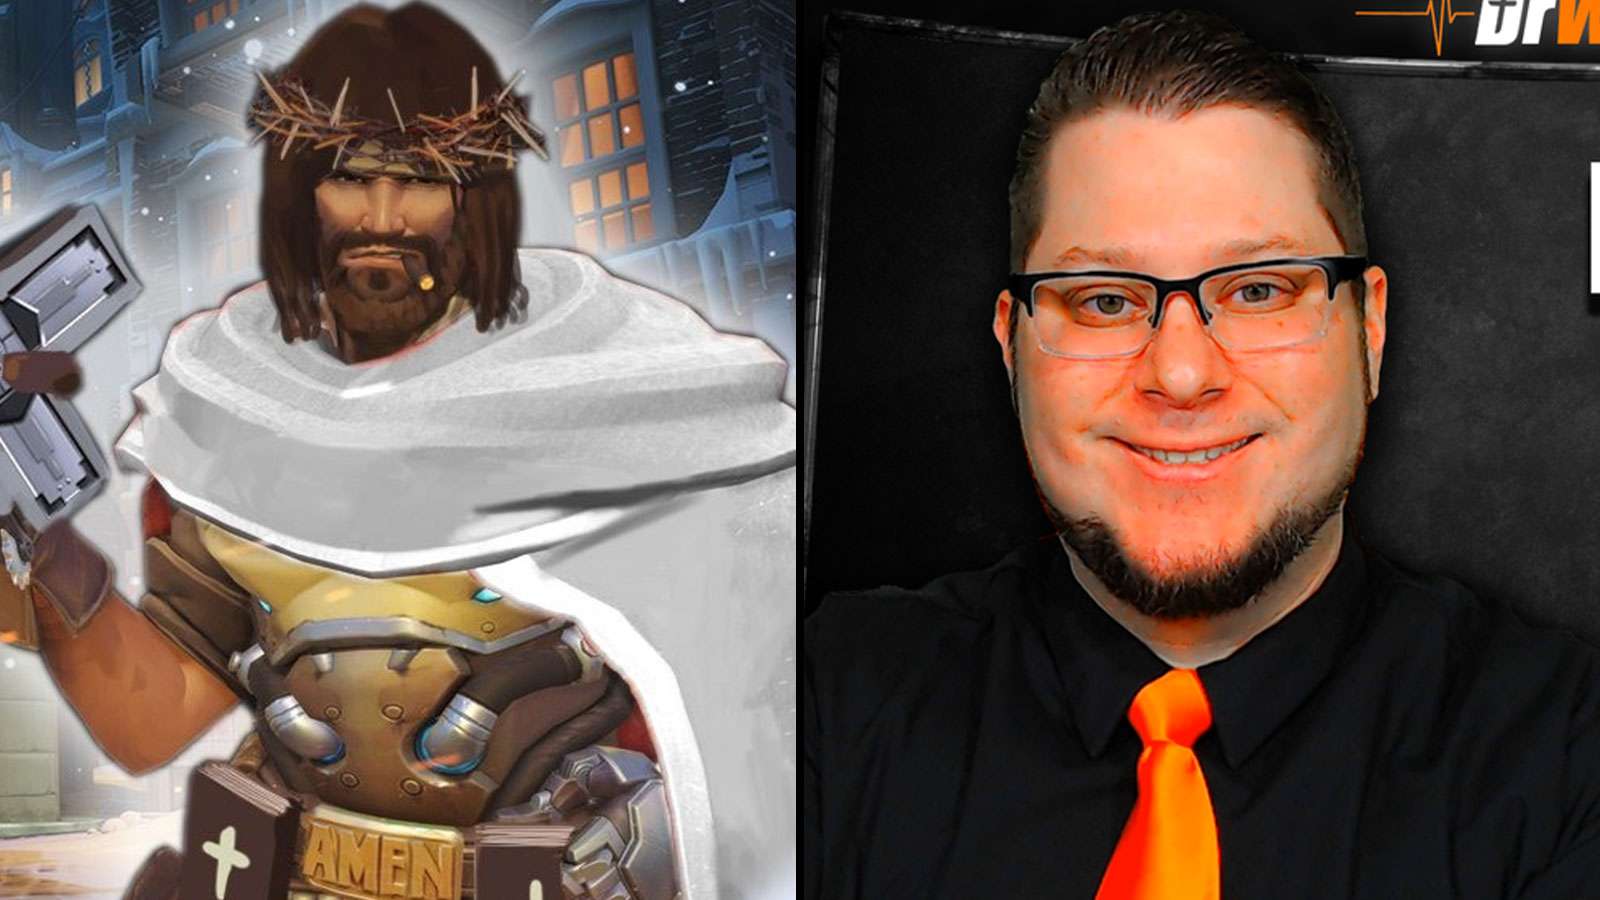 Jesus McCree header for Twitch streamer who told kid he was going to hell